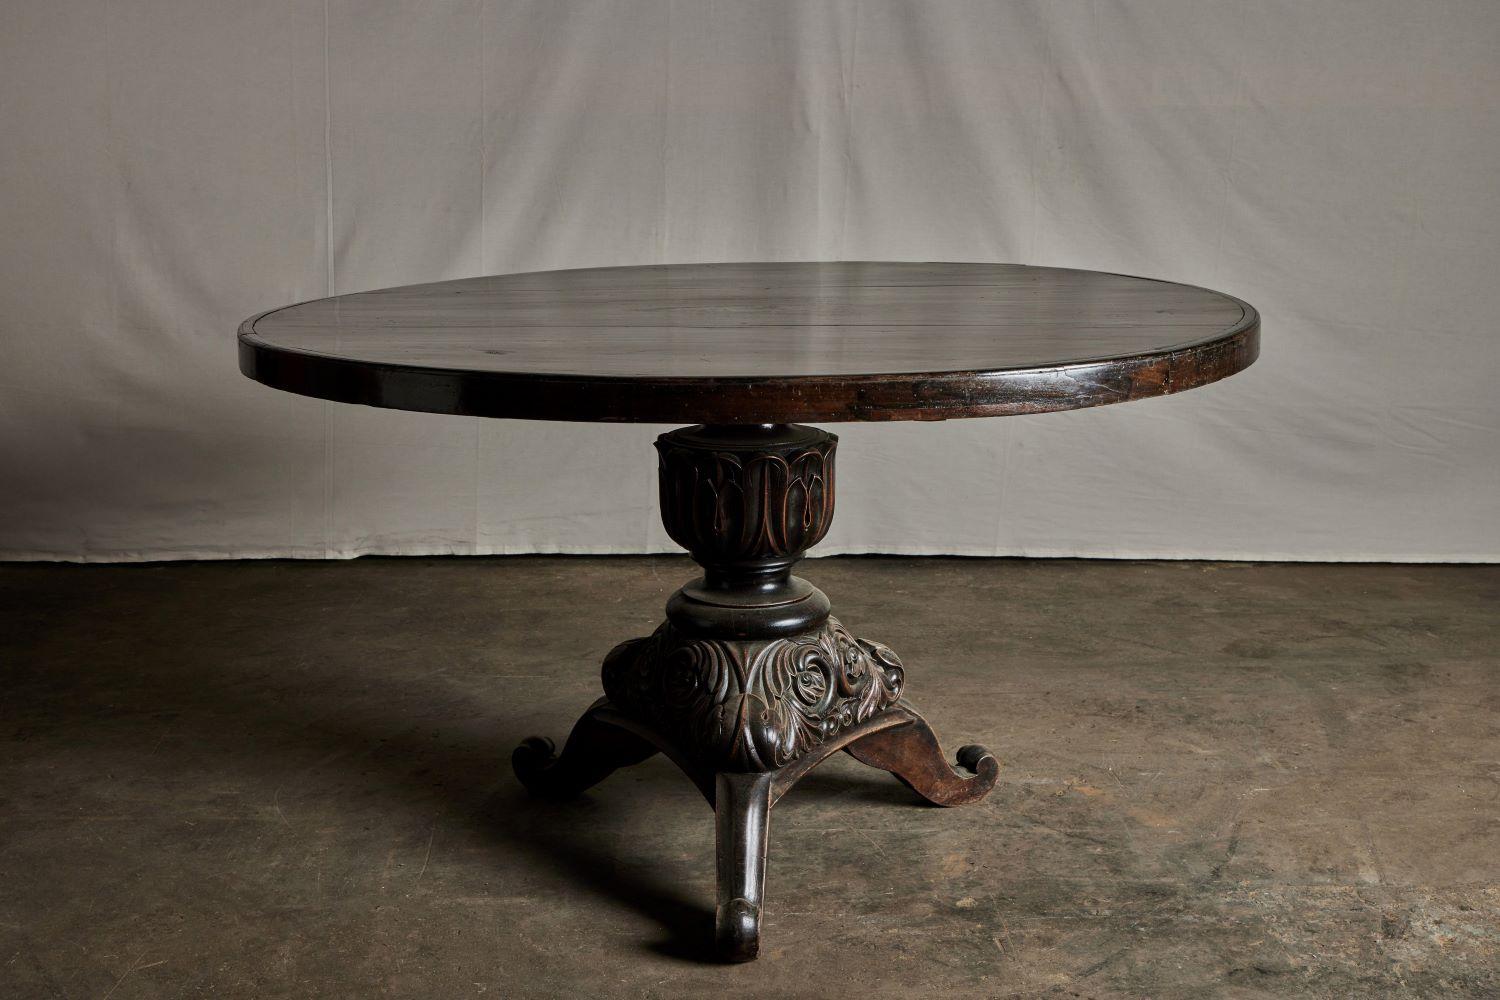 Indonesian pedestal table 54-inch diameter with intricate hand carving on base.